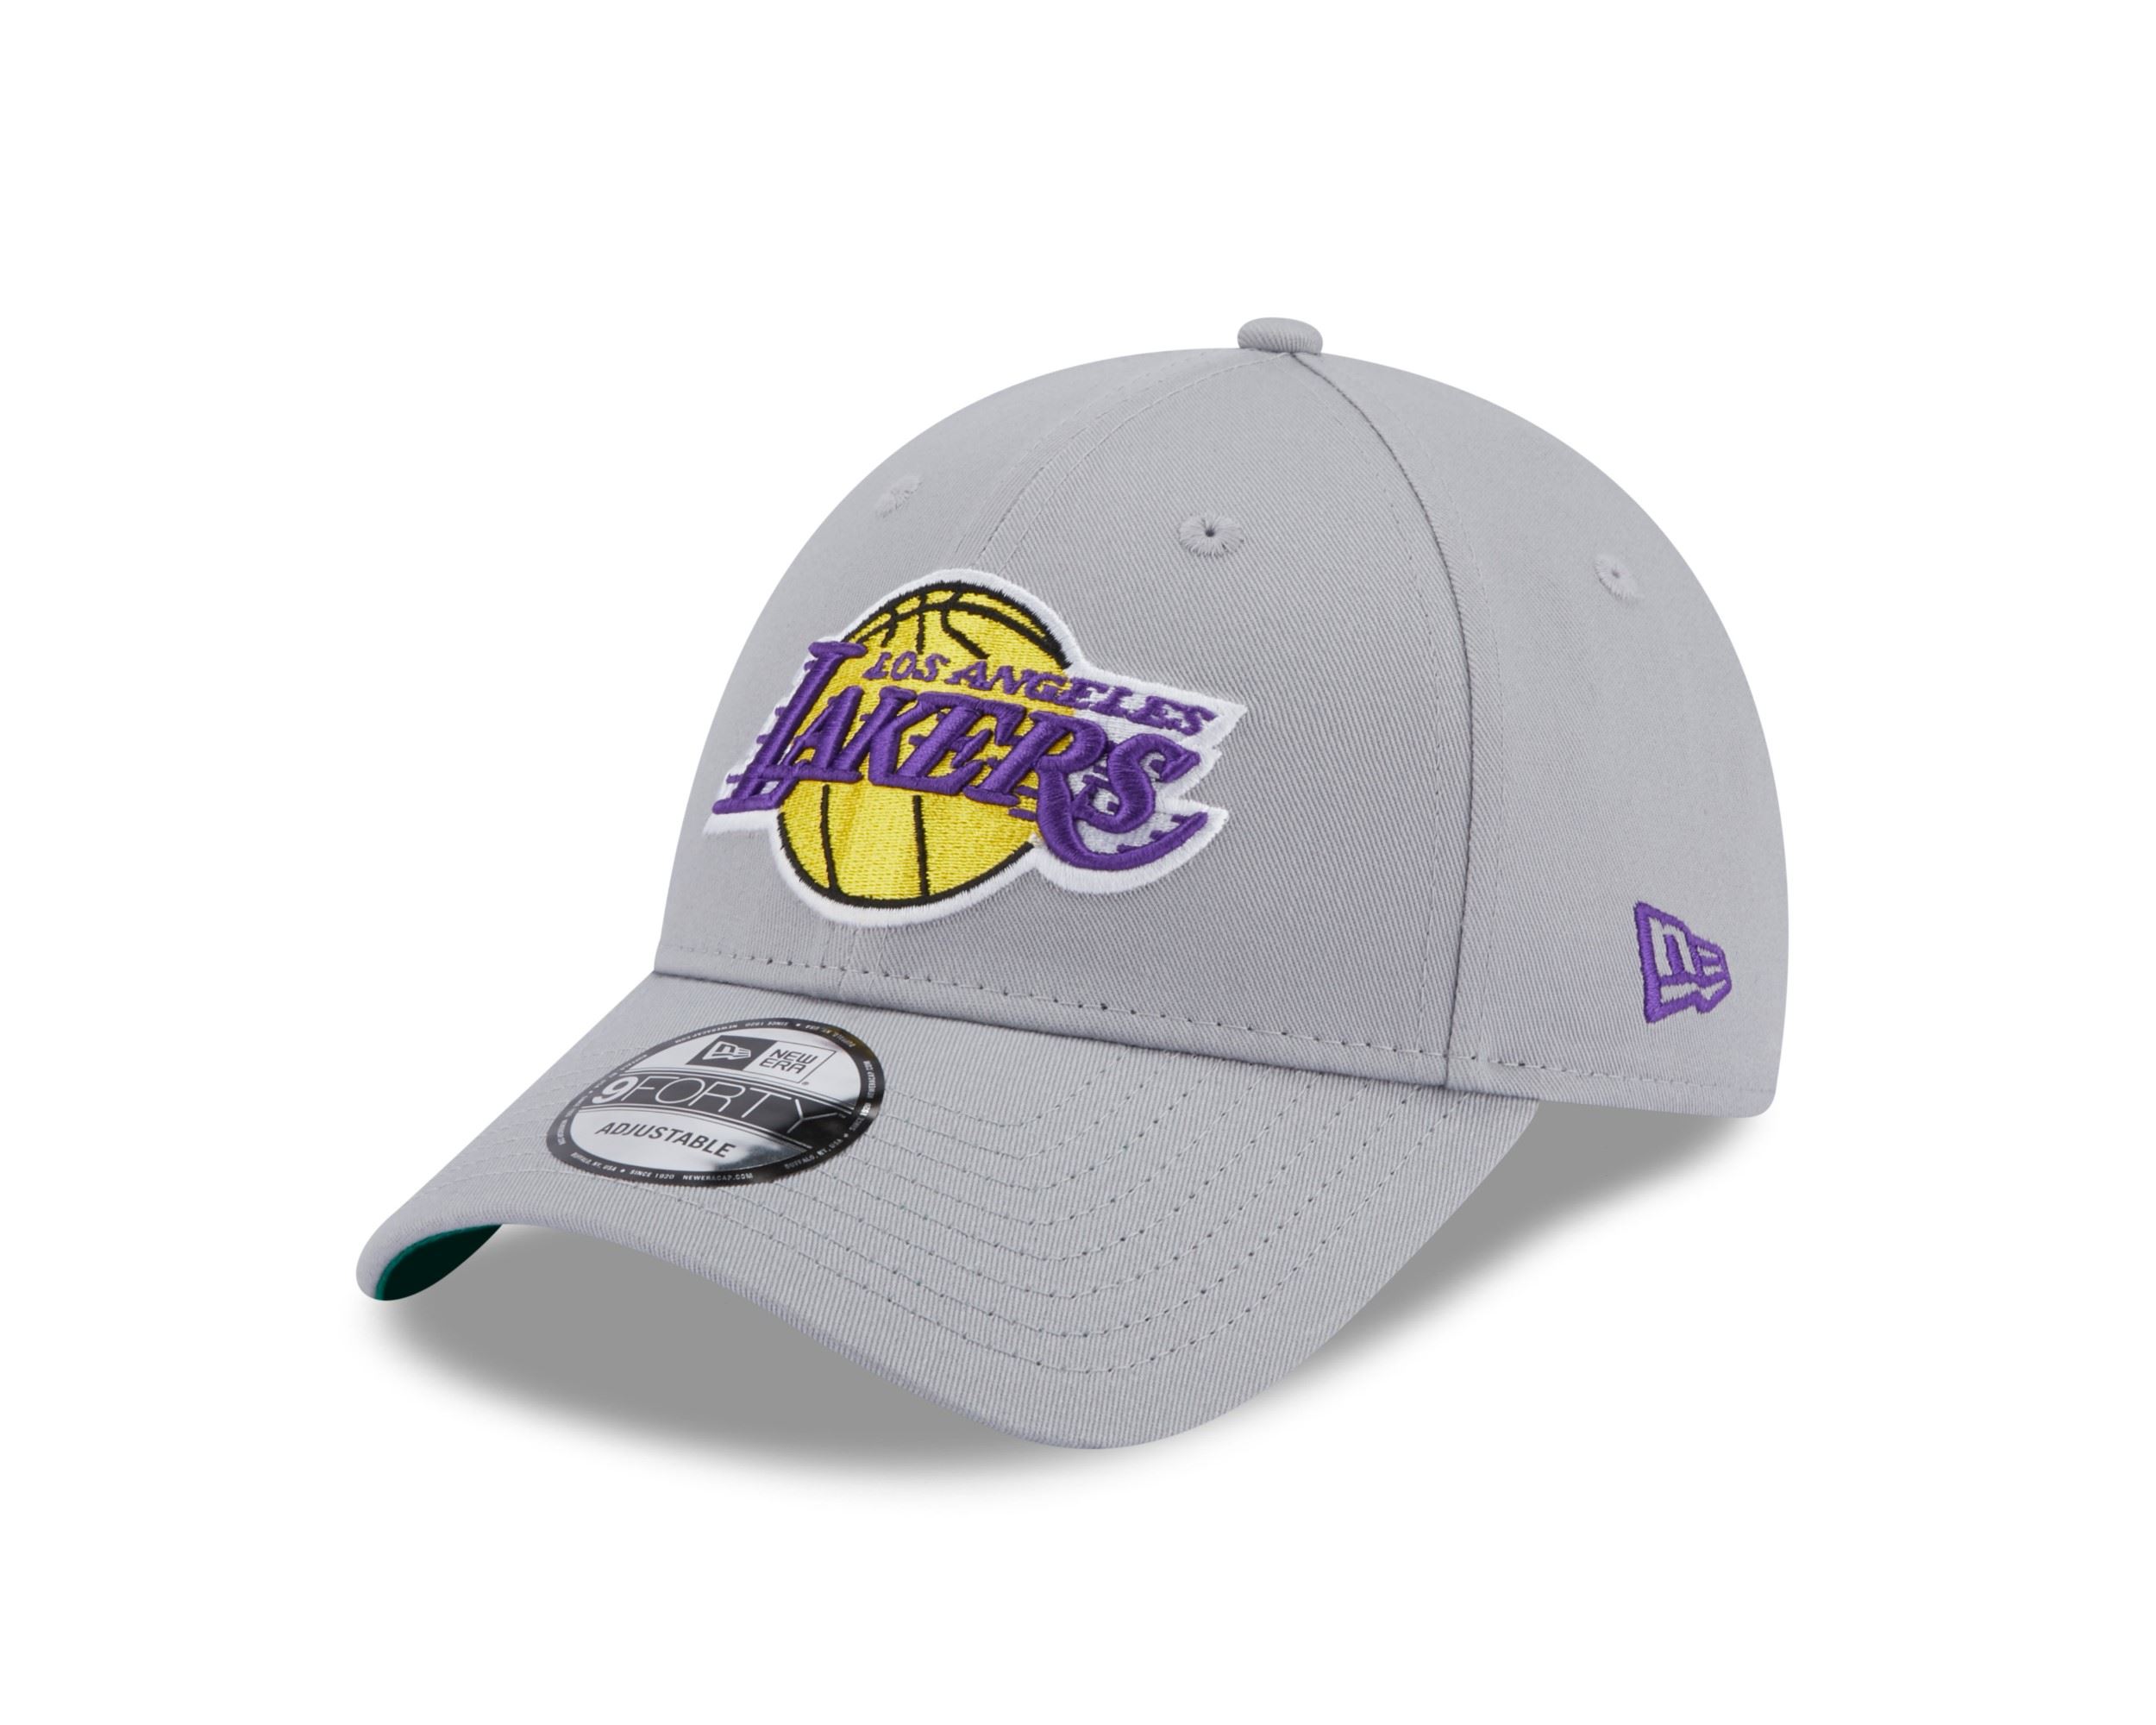 Los Angeles Lakers NBA Team Side Patch Grey 9Forty Adjustable Cap New Era